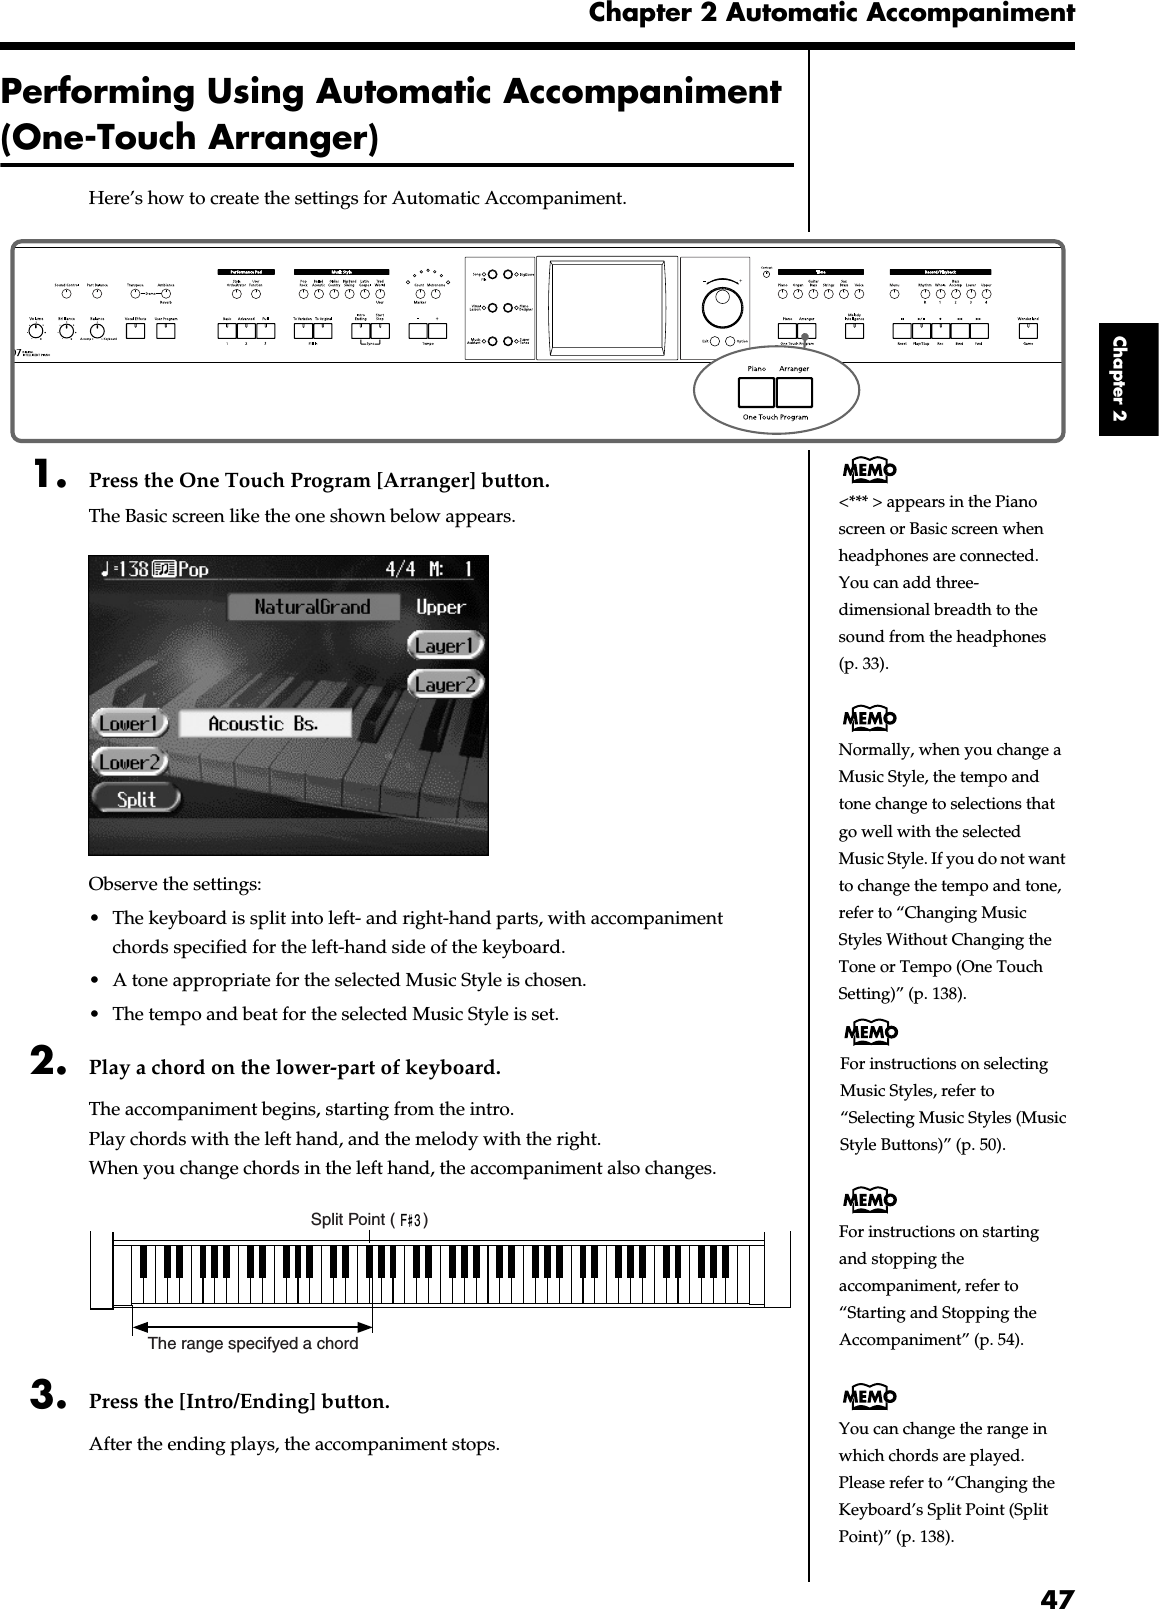 47Chapter 2 Automatic AccompanimentChapter 2Performing Using Automatic Accompaniment (One-Touch Arranger)Here’s how to create the settings for Automatic Accompaniment.fig.panel2-11. Press the One Touch Program [Arranger] button.The Basic screen like the one shown below appears.fig.d-arrbasic.eps_60Observe the settings:• The keyboard is split into left- and right-hand parts, with accompaniment chords specified for the left-hand side of the keyboard.• A tone appropriate for the selected Music Style is chosen.• The tempo and beat for the selected Music Style is set.2. Play a chord on the lower-part of keyboard.The accompaniment begins, starting from the intro.Play chords with the left hand, and the melody with the right.When you change chords in the left hand, the accompaniment also changes.fig.arr-split.e3. Press the [Intro/Ending] button.After the ending plays, the accompaniment stops.&lt;*** &gt; appears in the Piano screen or Basic screen when headphones are connected.You can add three-dimensional breadth to the sound from the headphones (p. 33).Normally, when you change a Music Style, the tempo and tone change to selections that go well with the selected Music Style. If you do not want to change the tempo and tone, refer to “Changing Music Styles Without Changing the Tone or Tempo (One Touch Setting)” (p. 138).F  3The range specifyed a chordSplit Point (      )For instructions on selecting Music Styles, refer to “Selecting Music Styles (Music Style Buttons)” (p. 50).For instructions on starting and stopping the accompaniment, refer to “Starting and Stopping the Accompaniment” (p. 54).You can change the range in which chords are played. Please refer to “Changing the Keyboard’s Split Point (Split Point)” (p. 138).